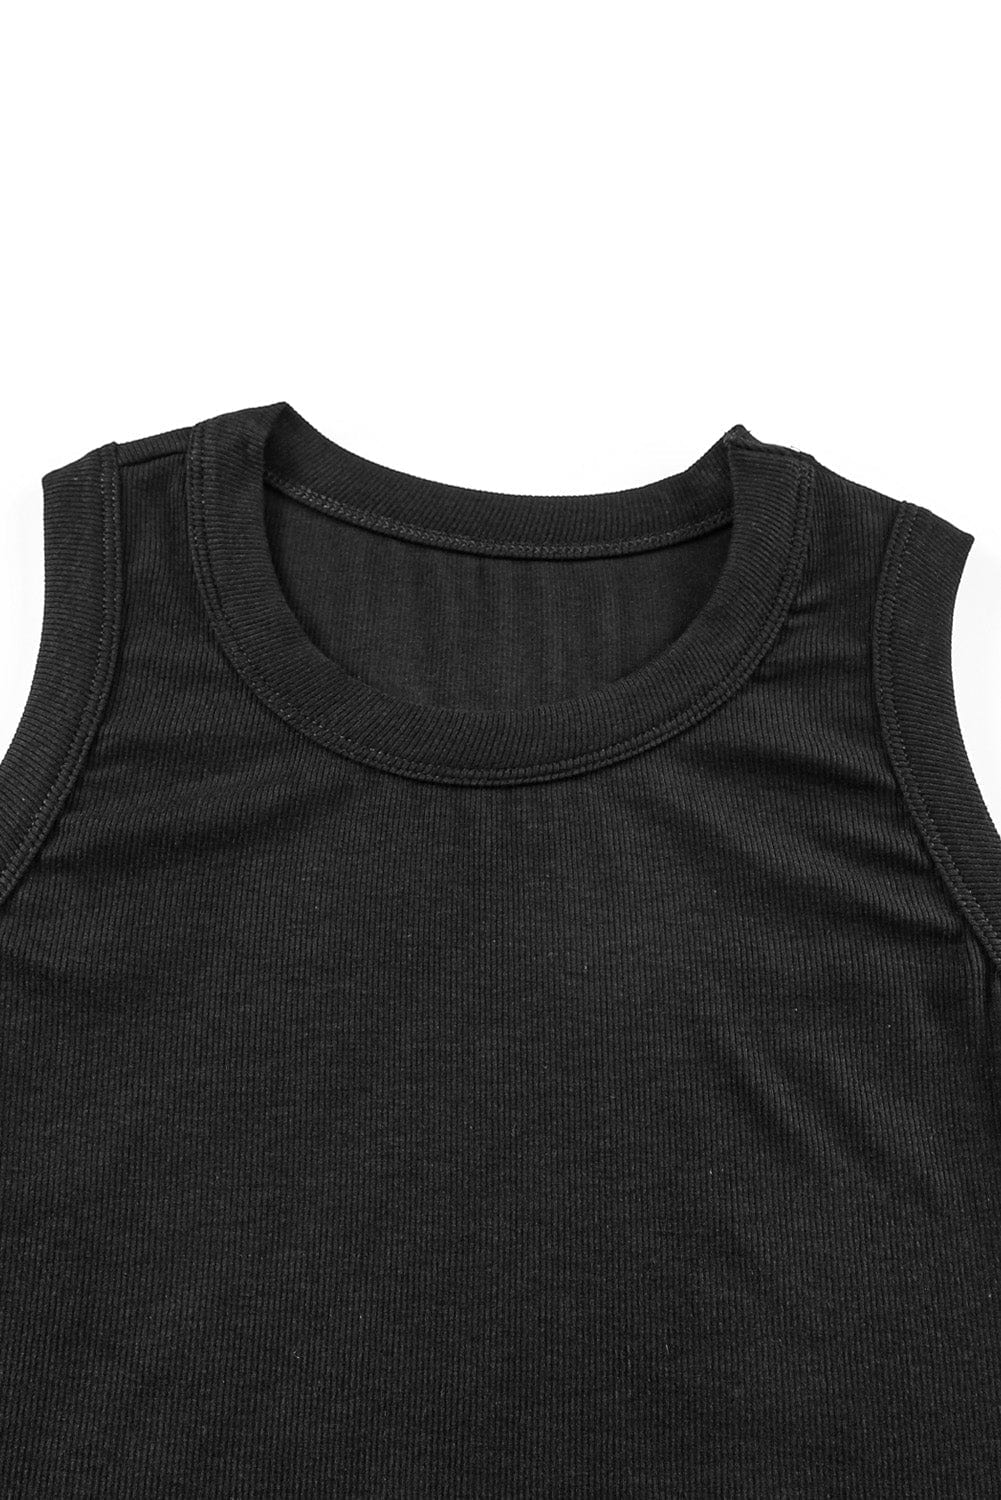 Solid Color Basic Ribbed Knit Slim Fit Tank Top - CLASSY CLOSET BOUTIQUESolid Color Basic Ribbed Knit Slim Fit Tank TopTank TopsSW2566276-2-S104361016395BlackS